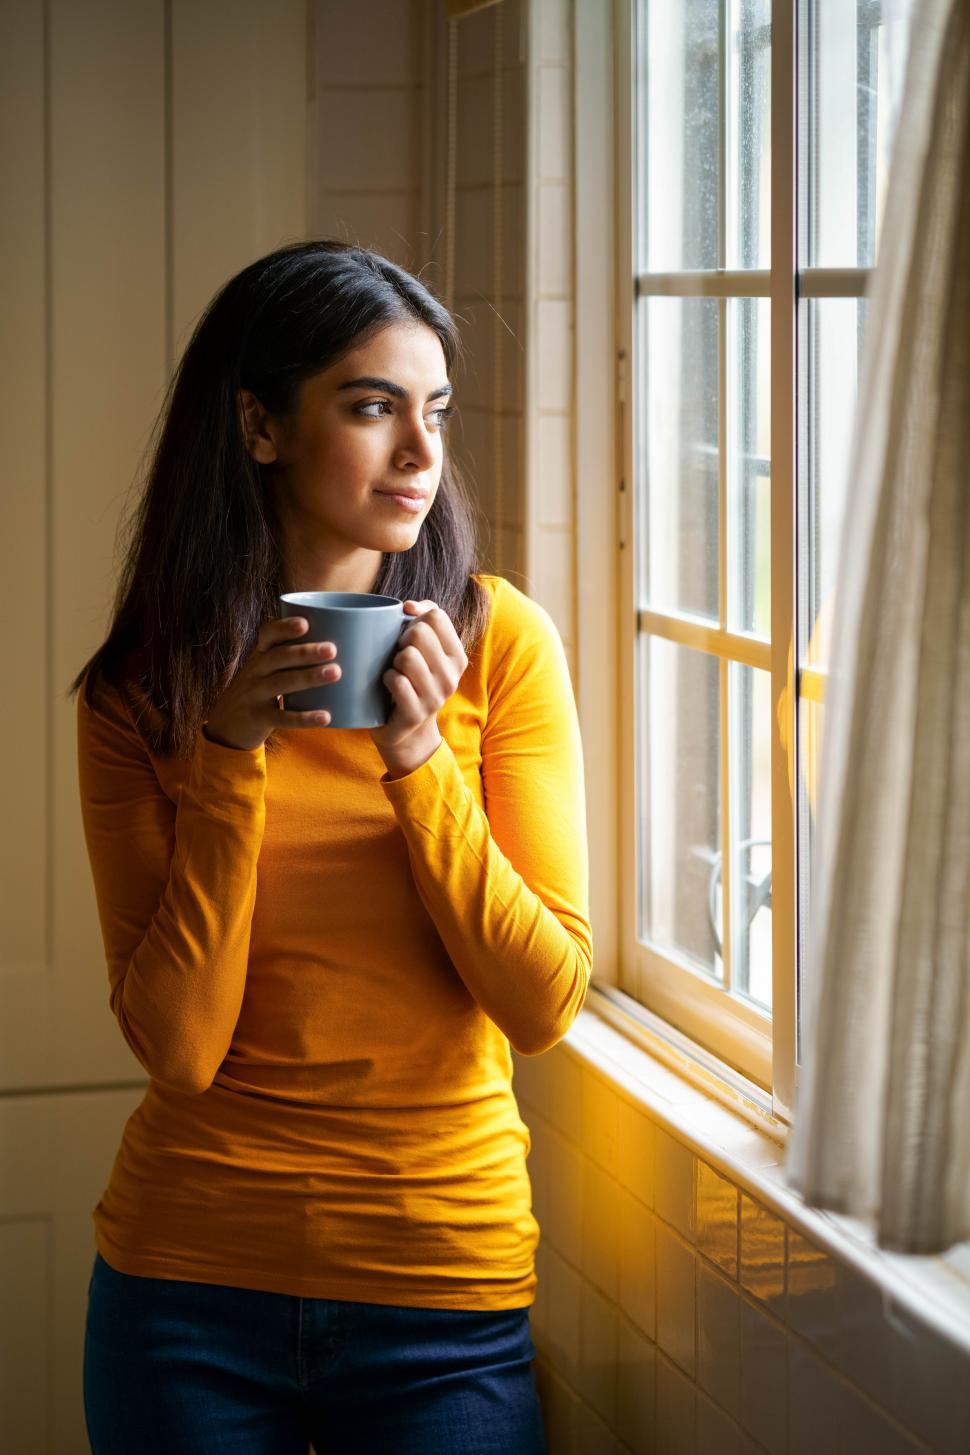 Free Image of Persian woman drinking coffee while looking through the window 